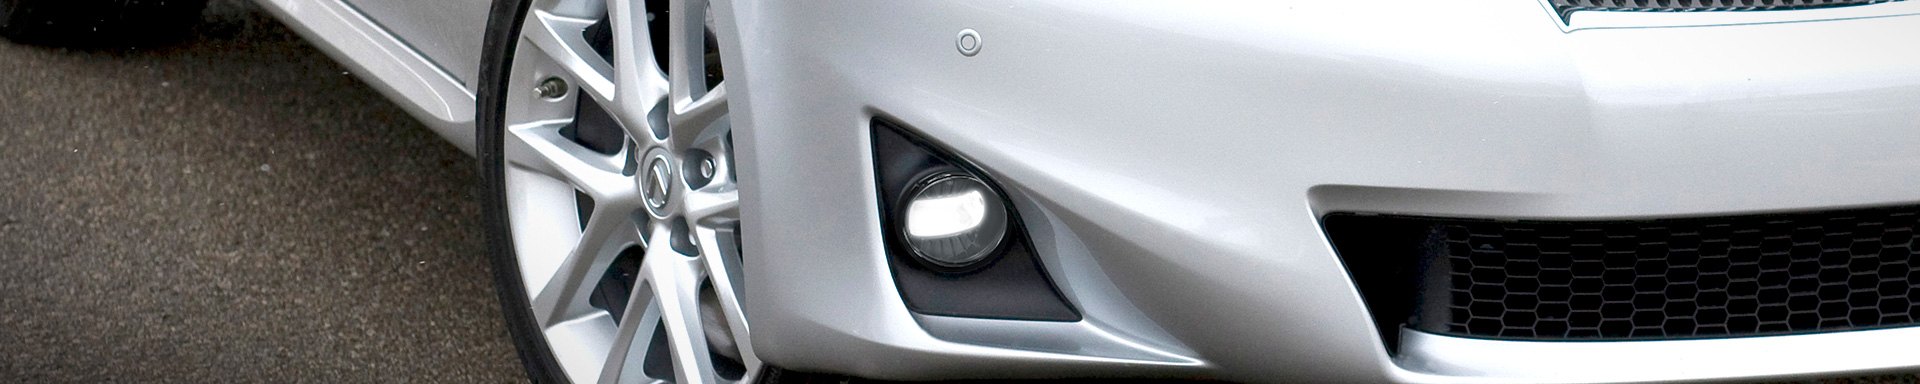 New LED Fog Lights by Lumen For Lexus, Scion and Toyota Models